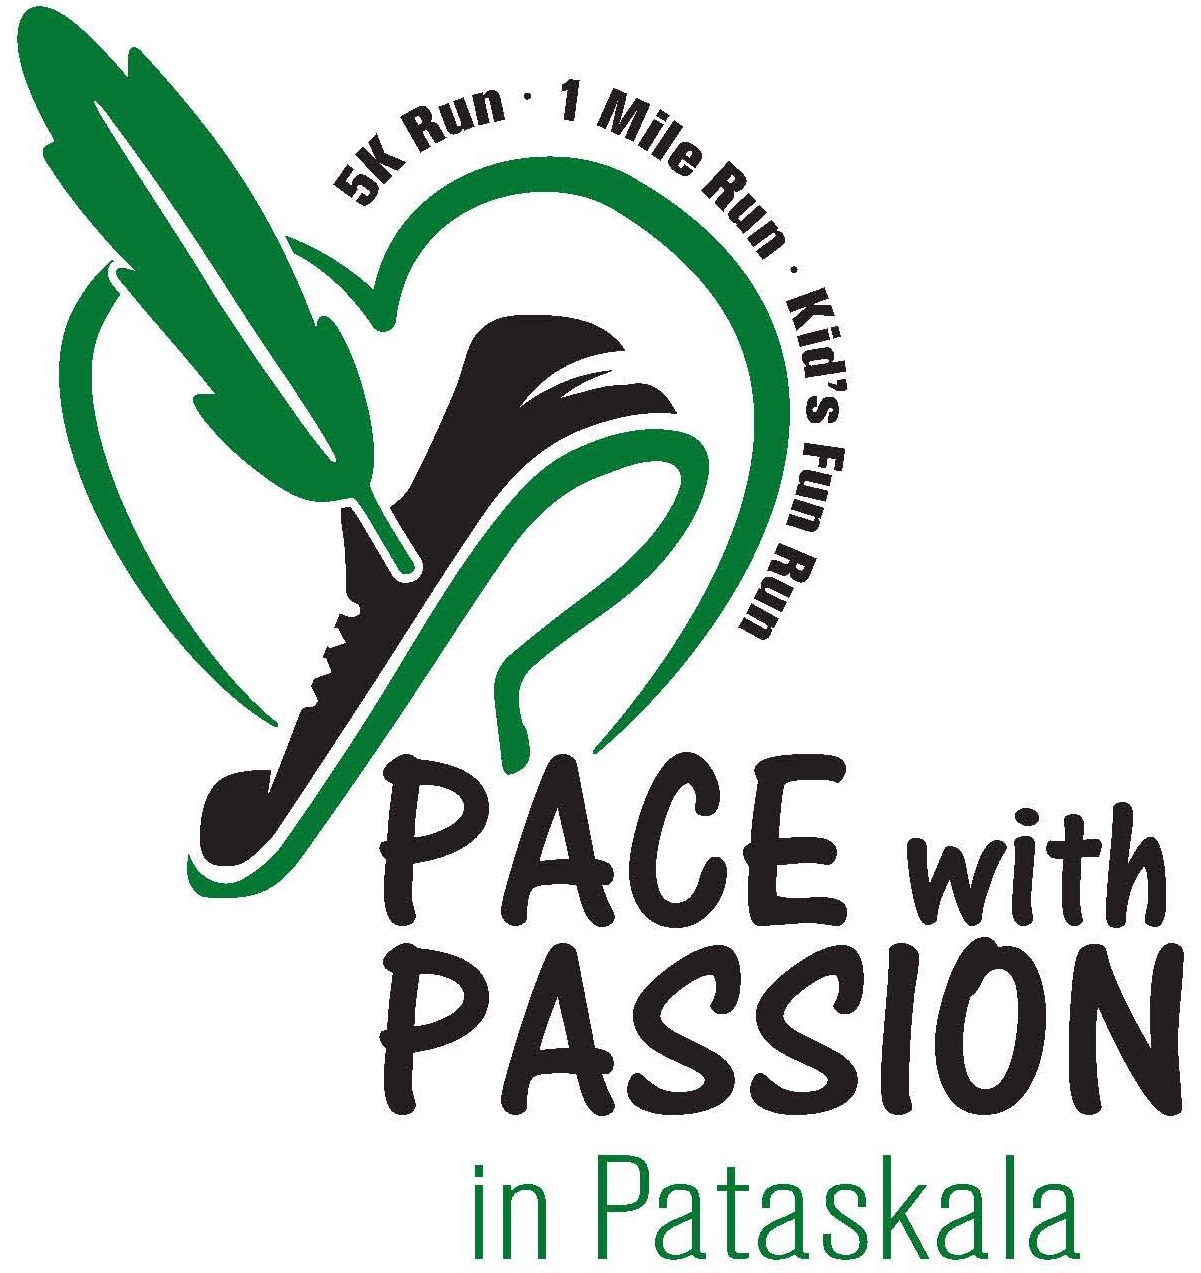 Pataskala's Pace With Passion 5k, 1 mile and Kids Fun Run